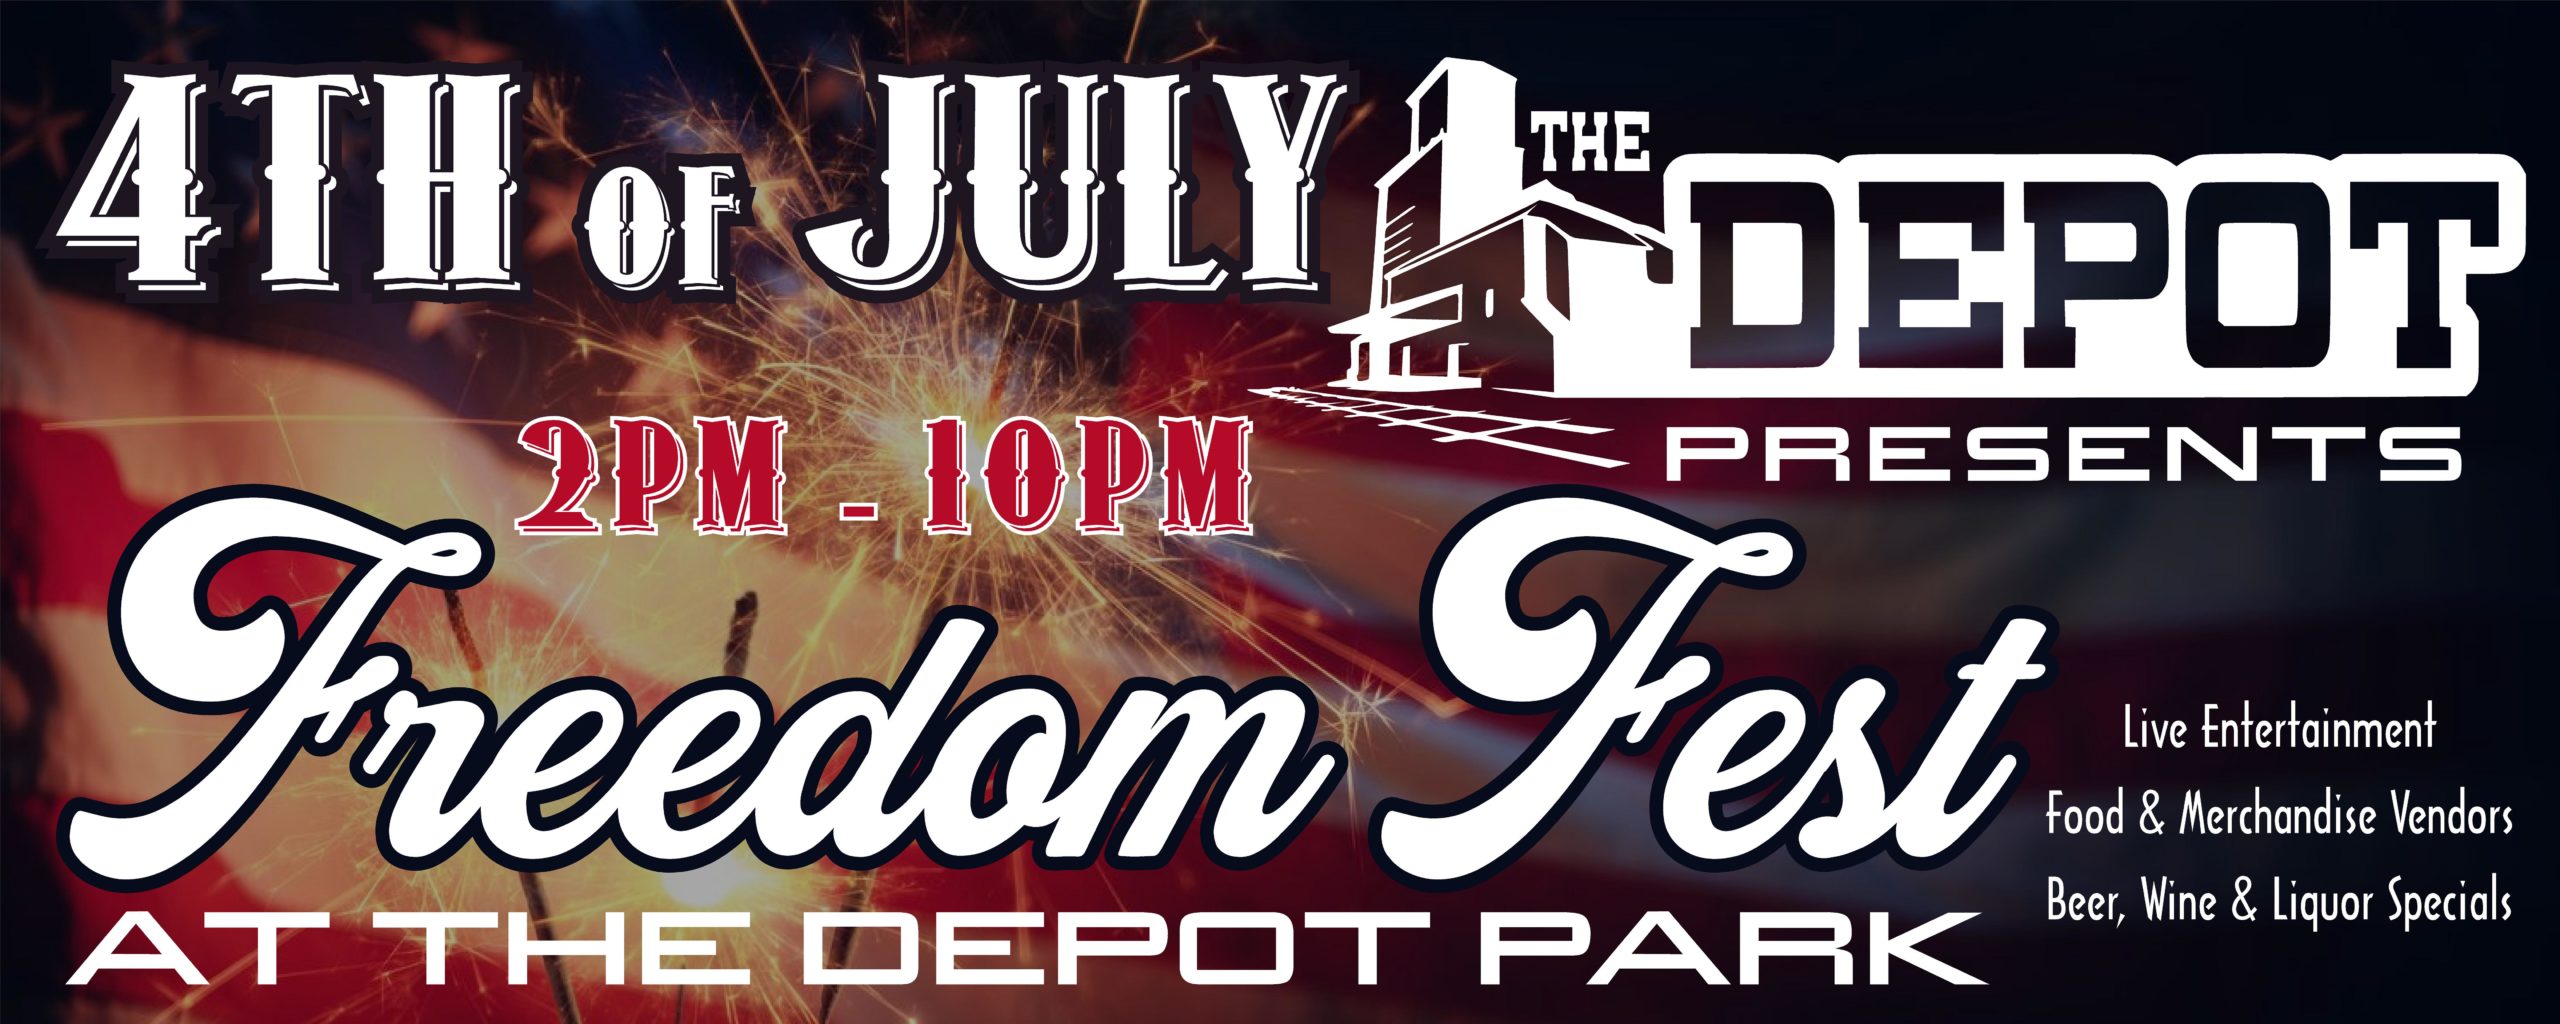 depot - 4th of july banner -